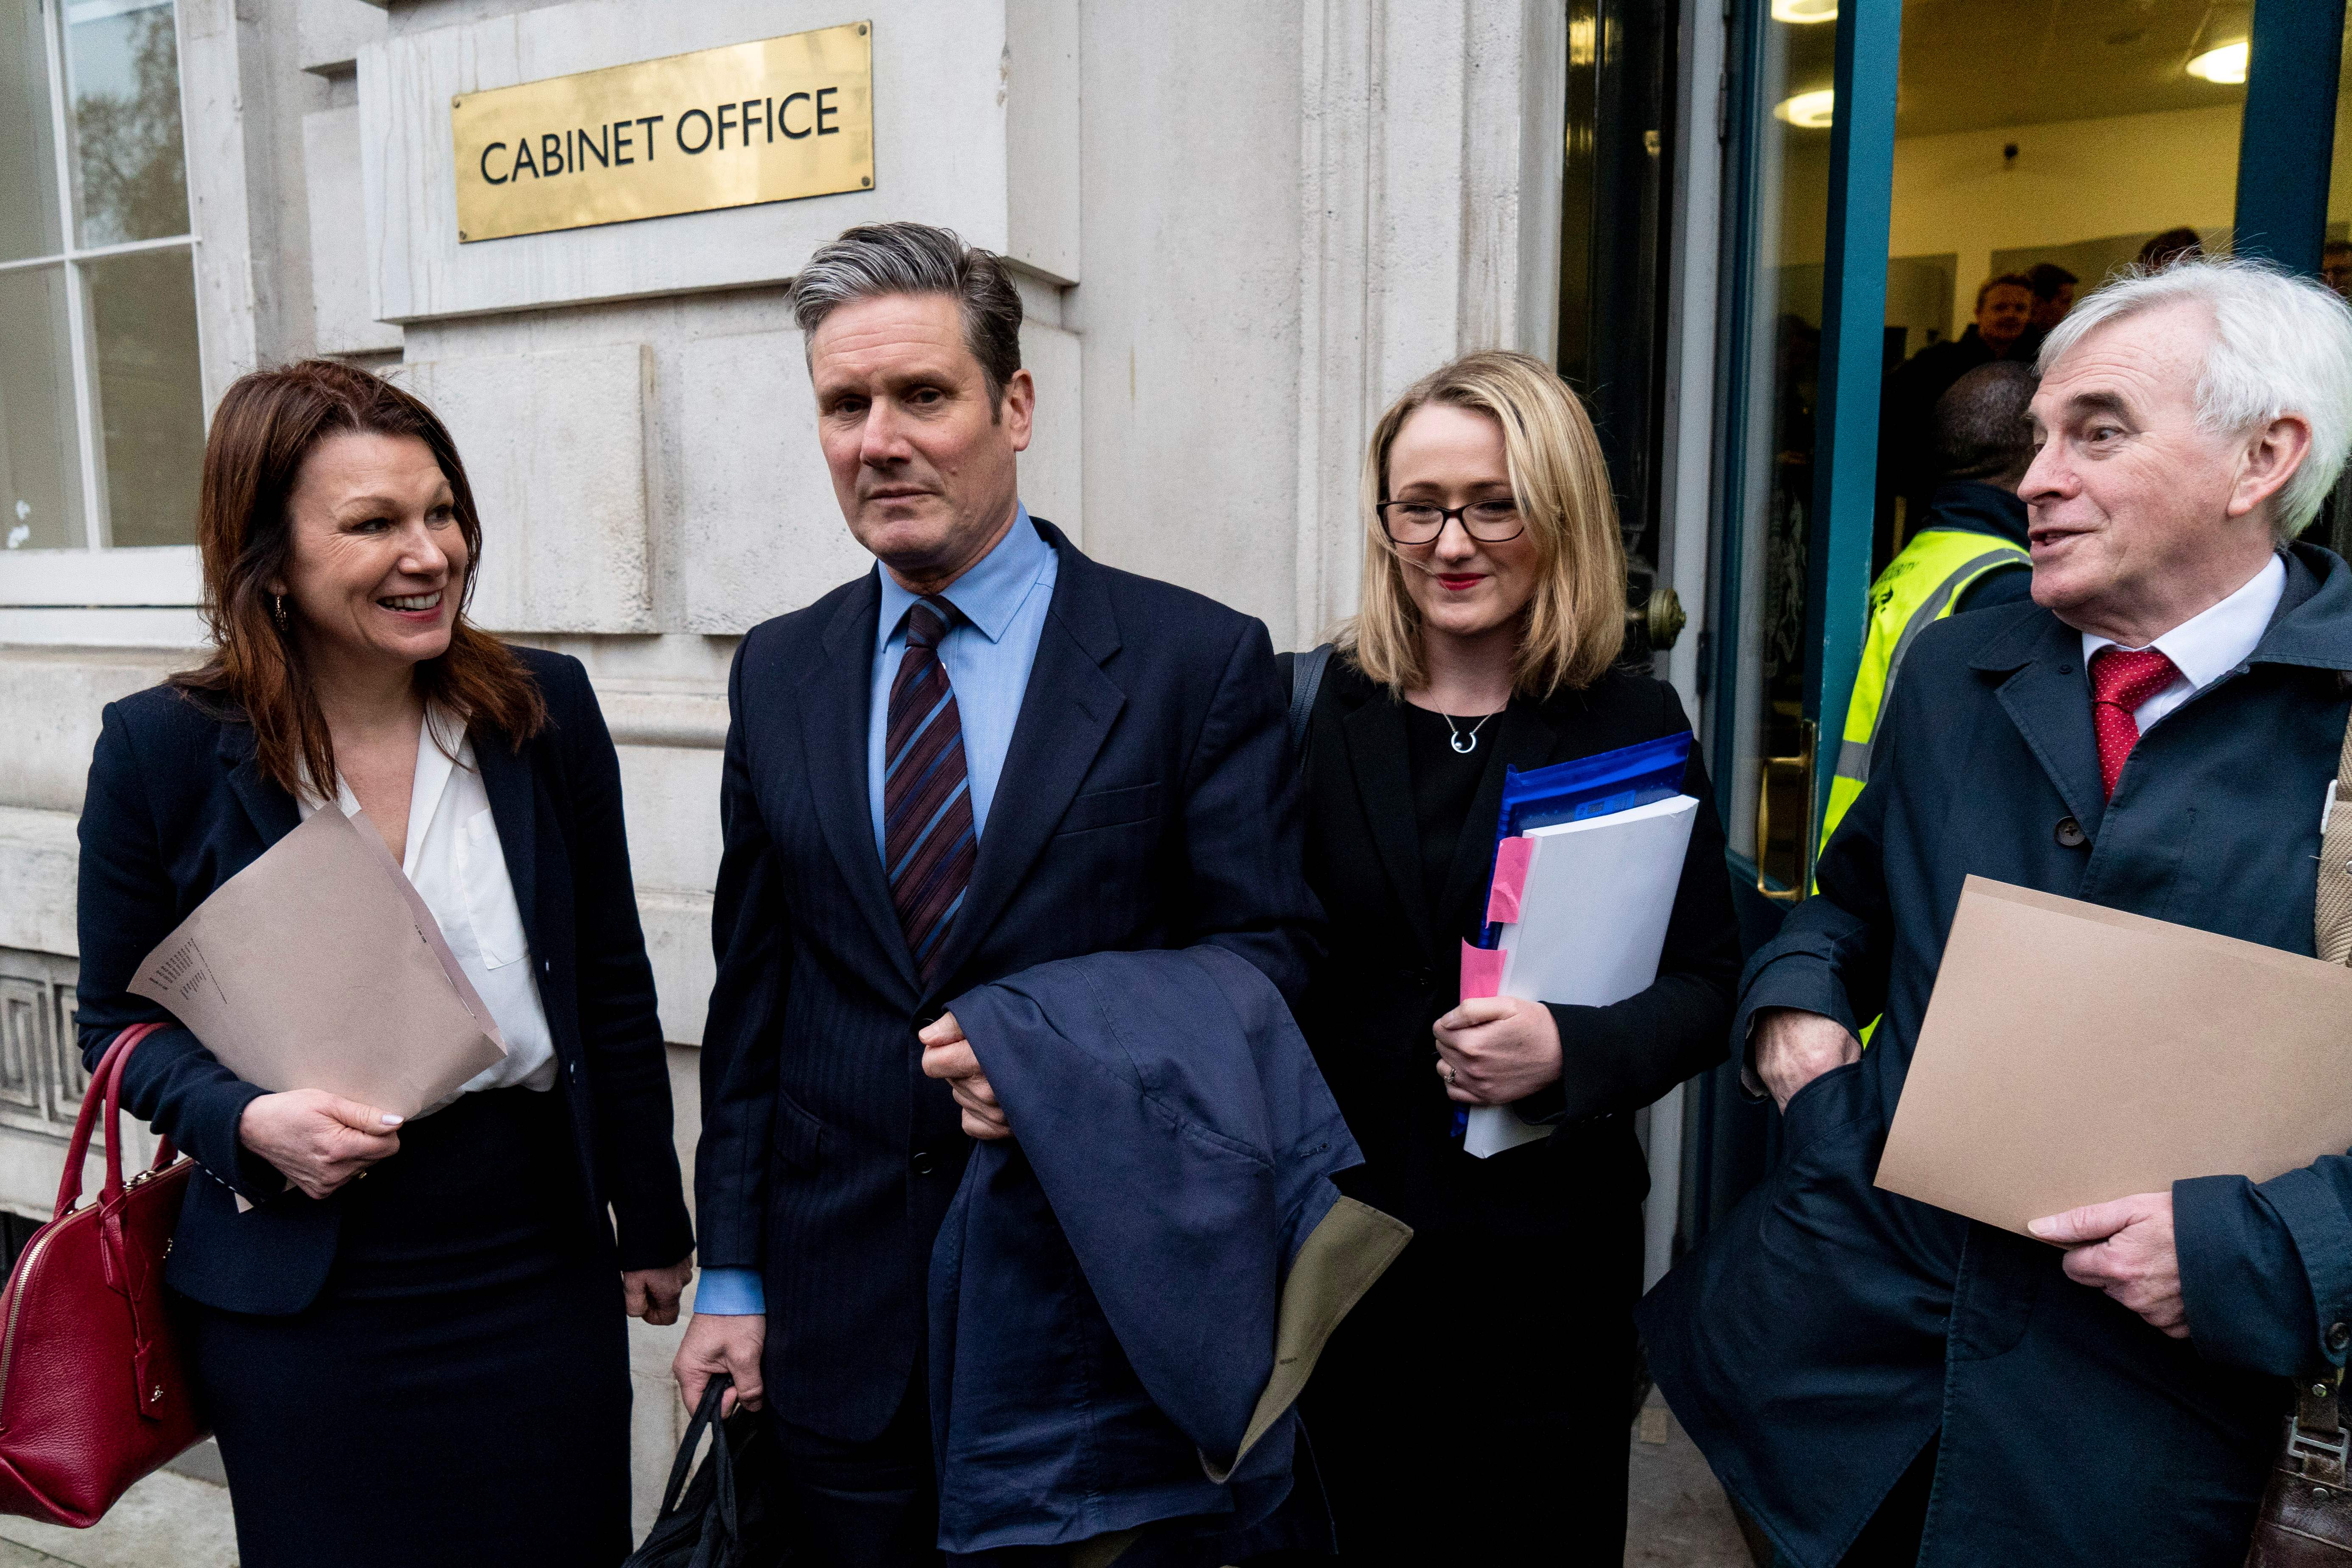 Labour's negotiating team arrives at the Cabinet Office for Brexit discussions with government ministers on Tuesday.